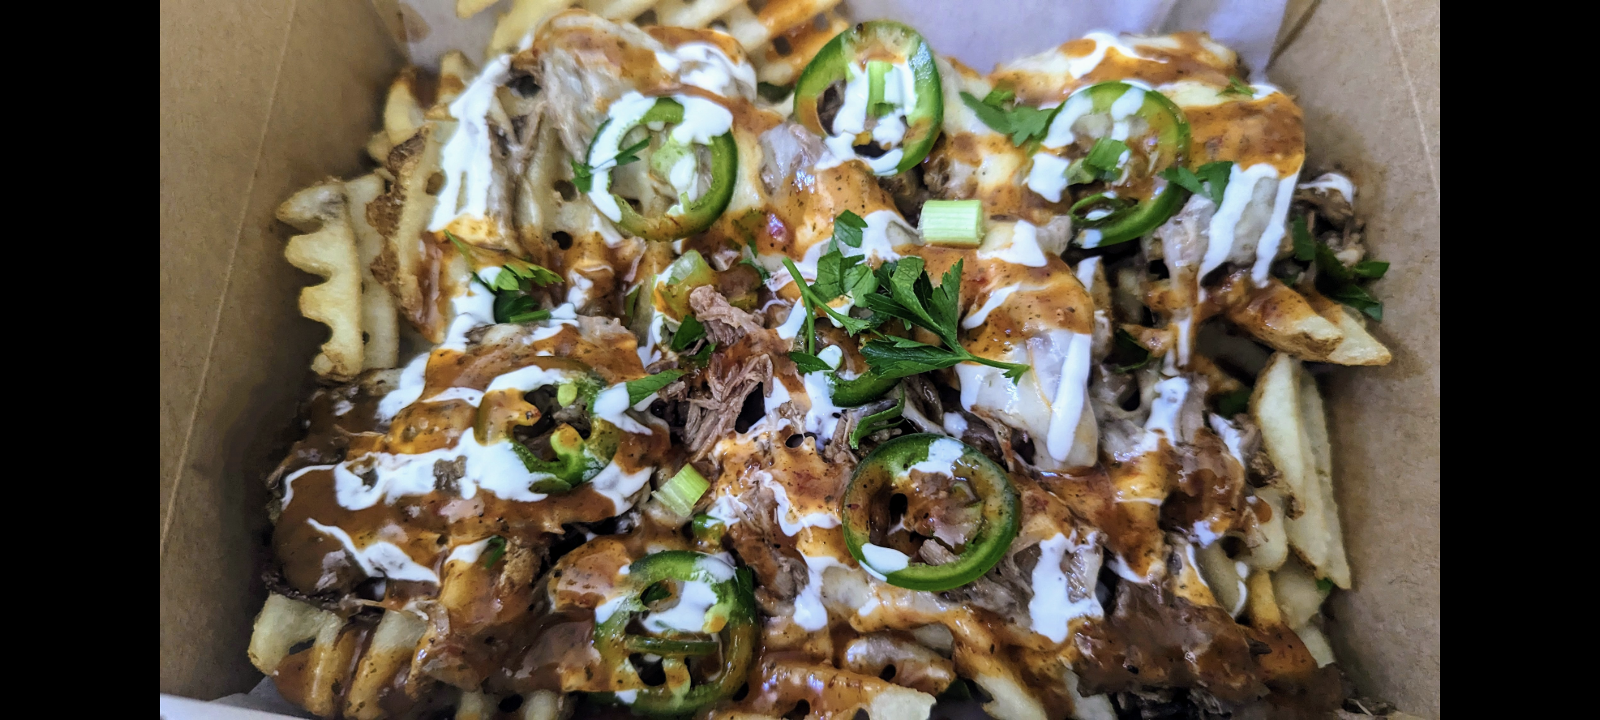 Loaded Freedom Fries (Savory slow cooked beef, Muenster cheese, Green onion, Fresh jalapeno slices, Mexican crema, and our Signature CCV sauce)